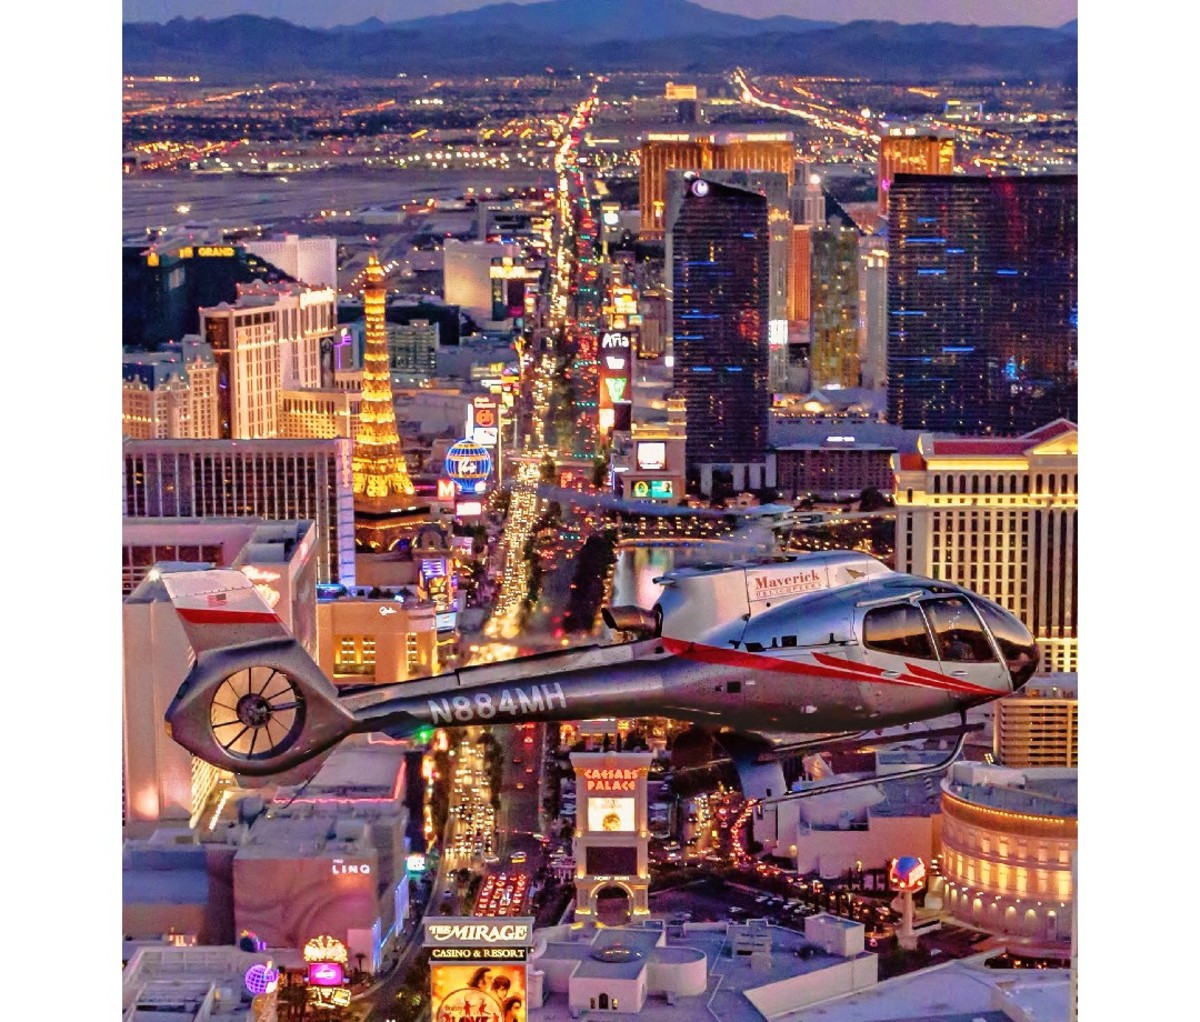 Helicopter hovering above the lights of the Vegas Strip at night